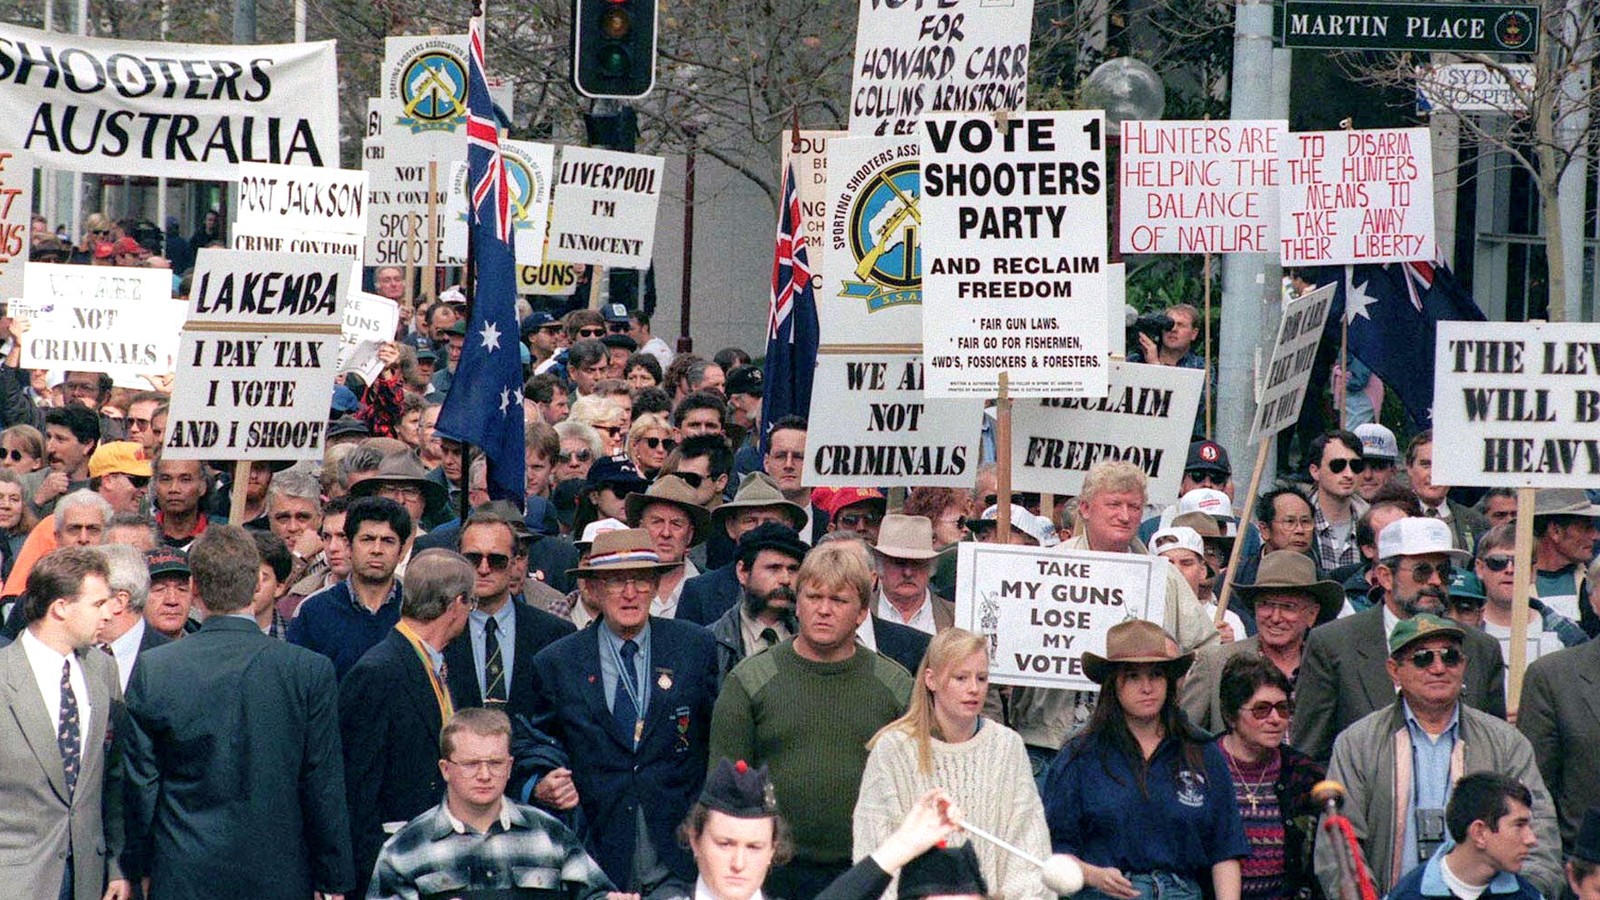 How Australia Restricted After Massacre - The